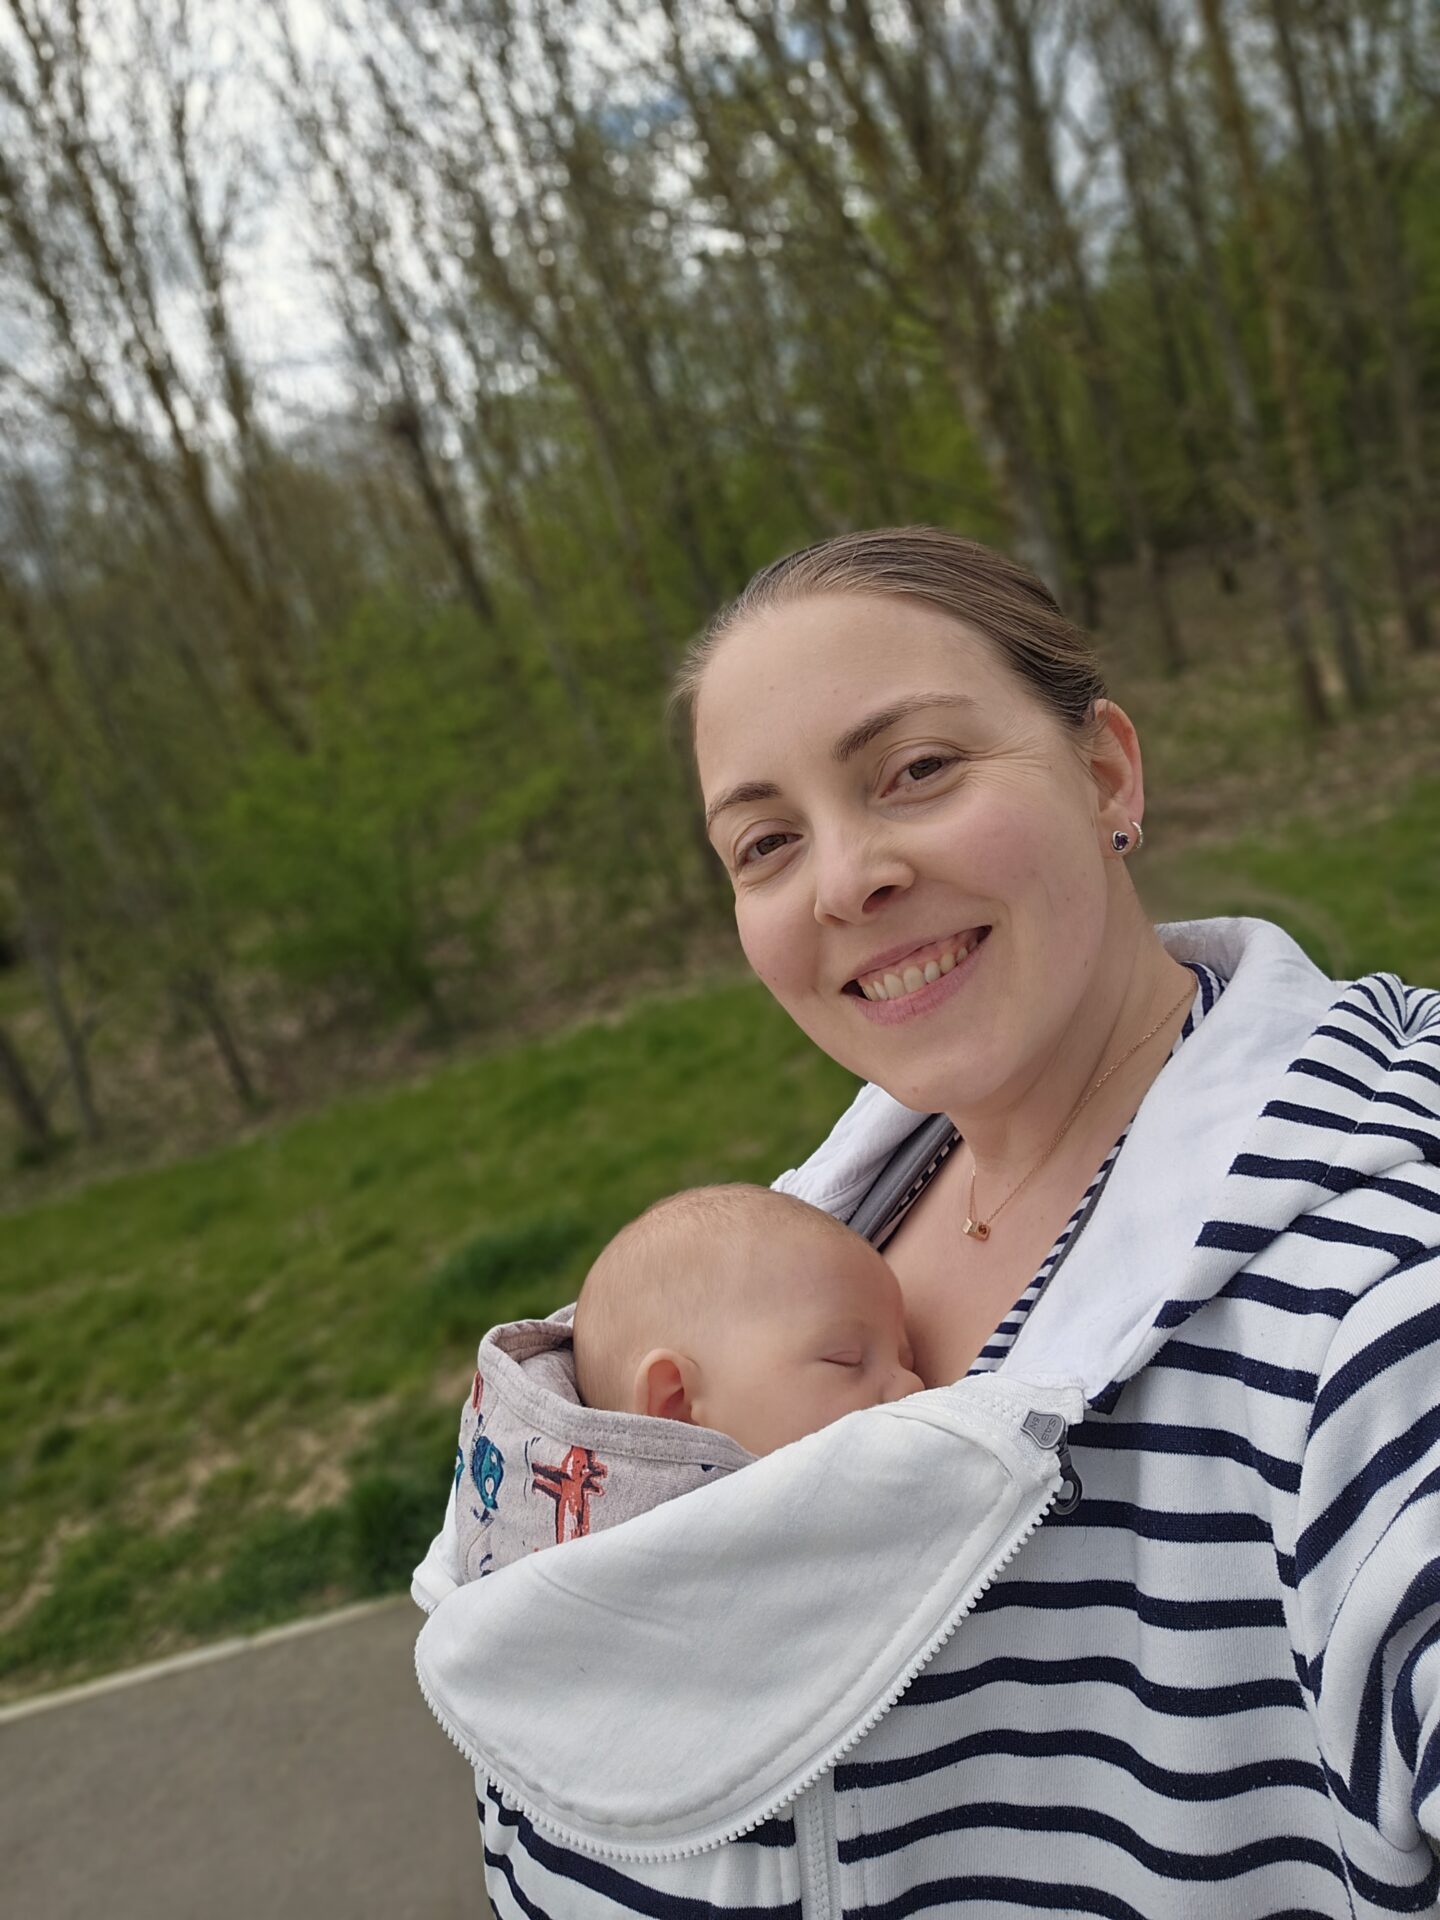 Woman wearing a striped blue and white hoody is carrying a baby on her chest. The baby is sleeping and the woman is smiling. The background is blurred and shows green grass and trees. 